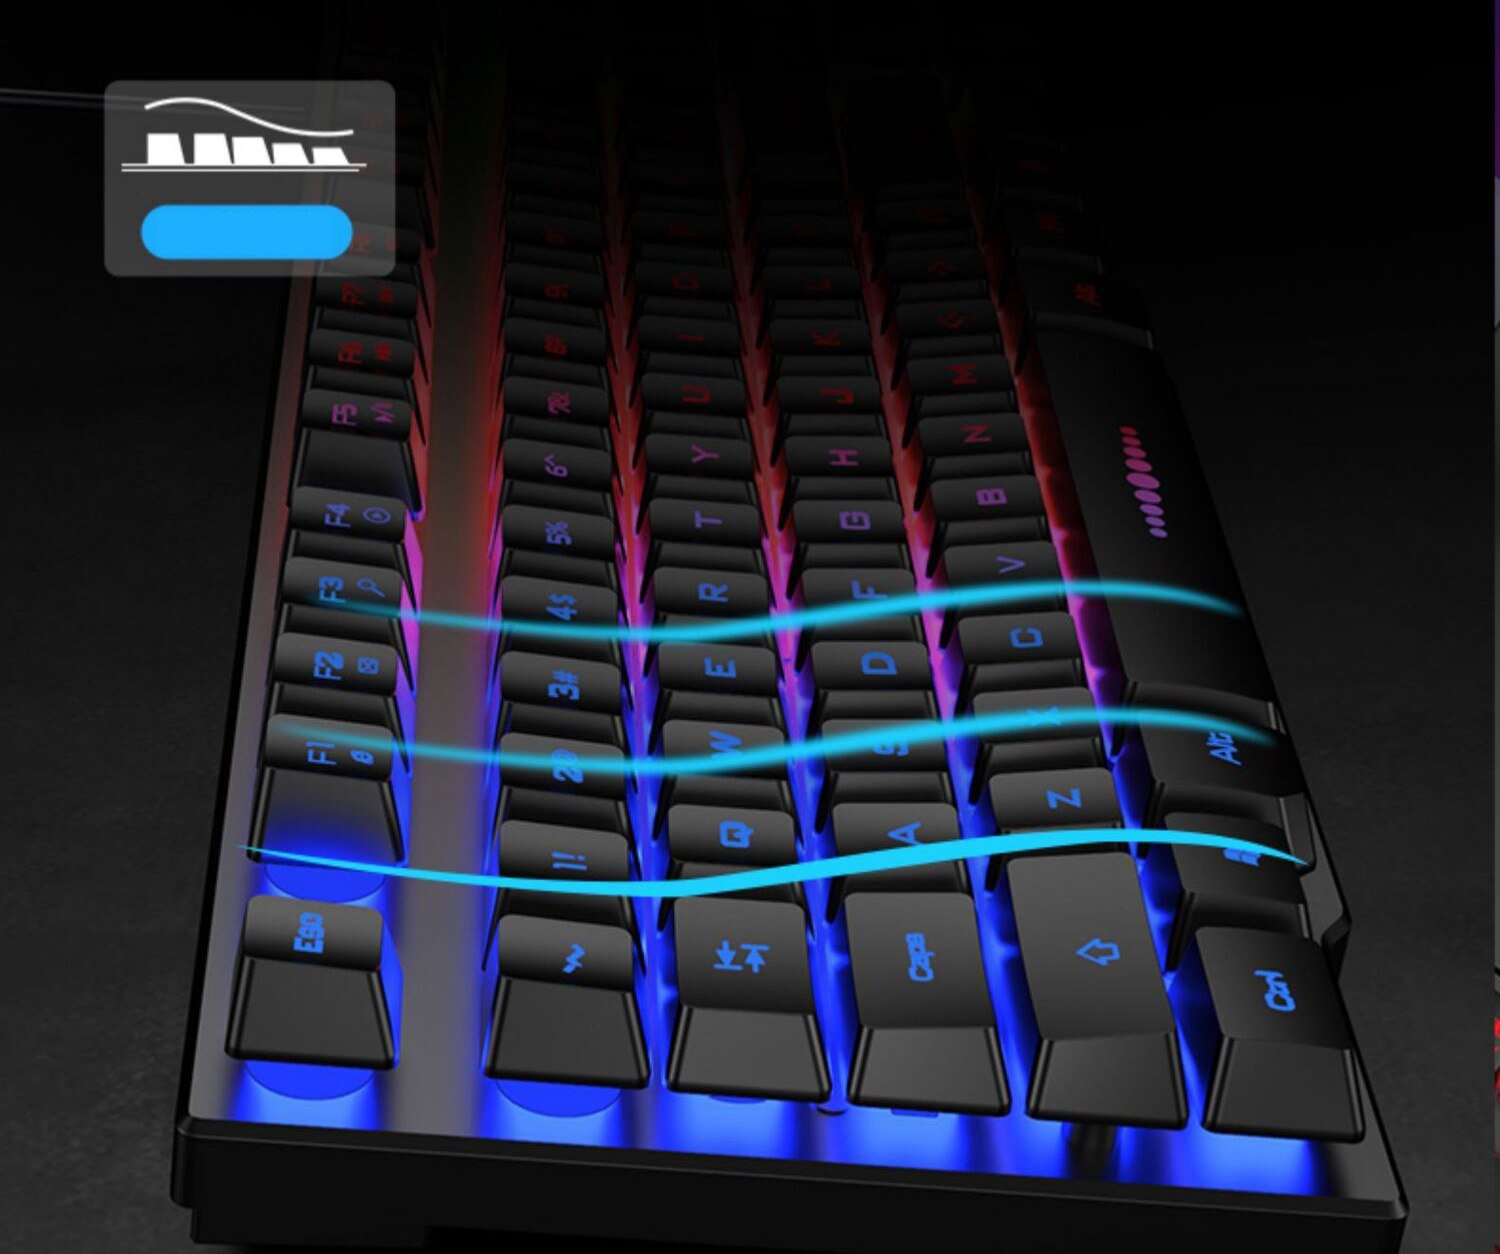 Gaming Keyboard and Mouse Combo Headset - Bargainwizz